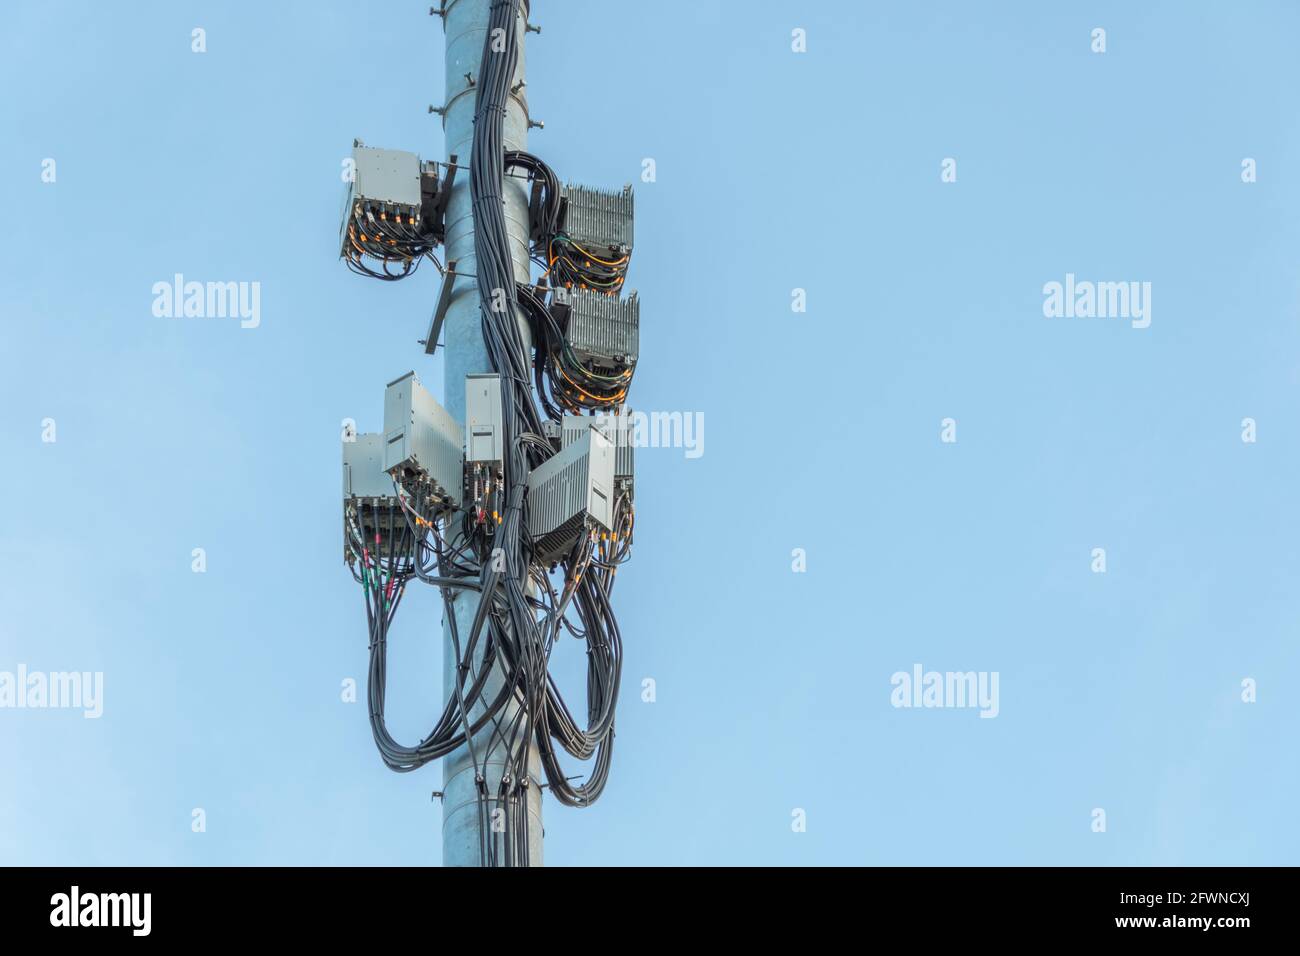 Cellular macro Base Transceiver Station. Telecommunication tower. Wireless Communication Antenna Transmitter. Transformers and Power Plants Distributo Stock Photo